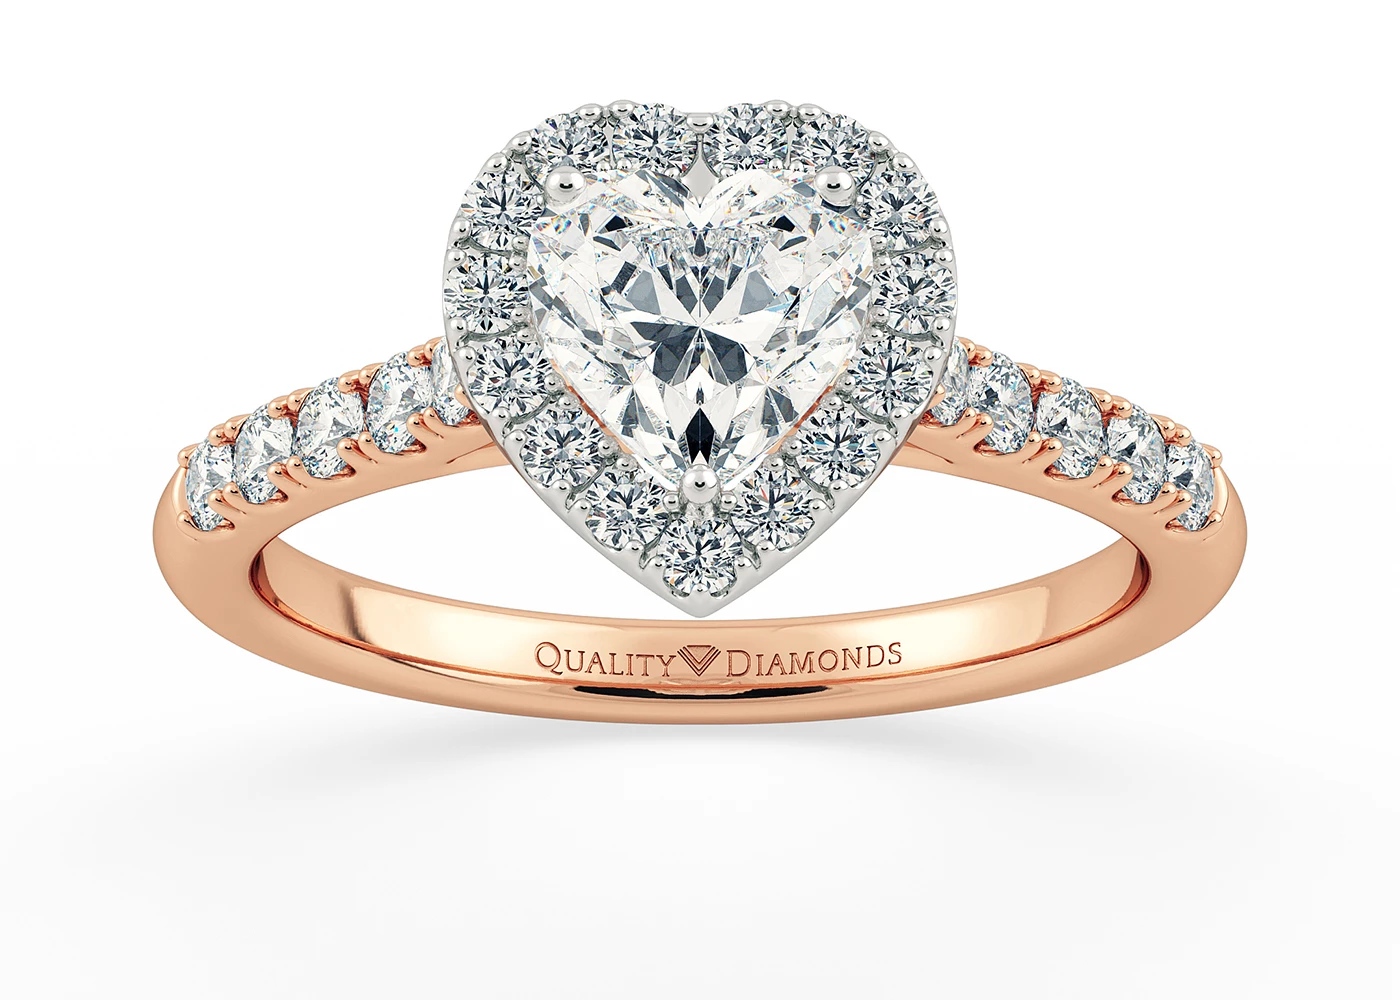 Two Carat Halo Heart Diamond Ring in 18K Rose Gold